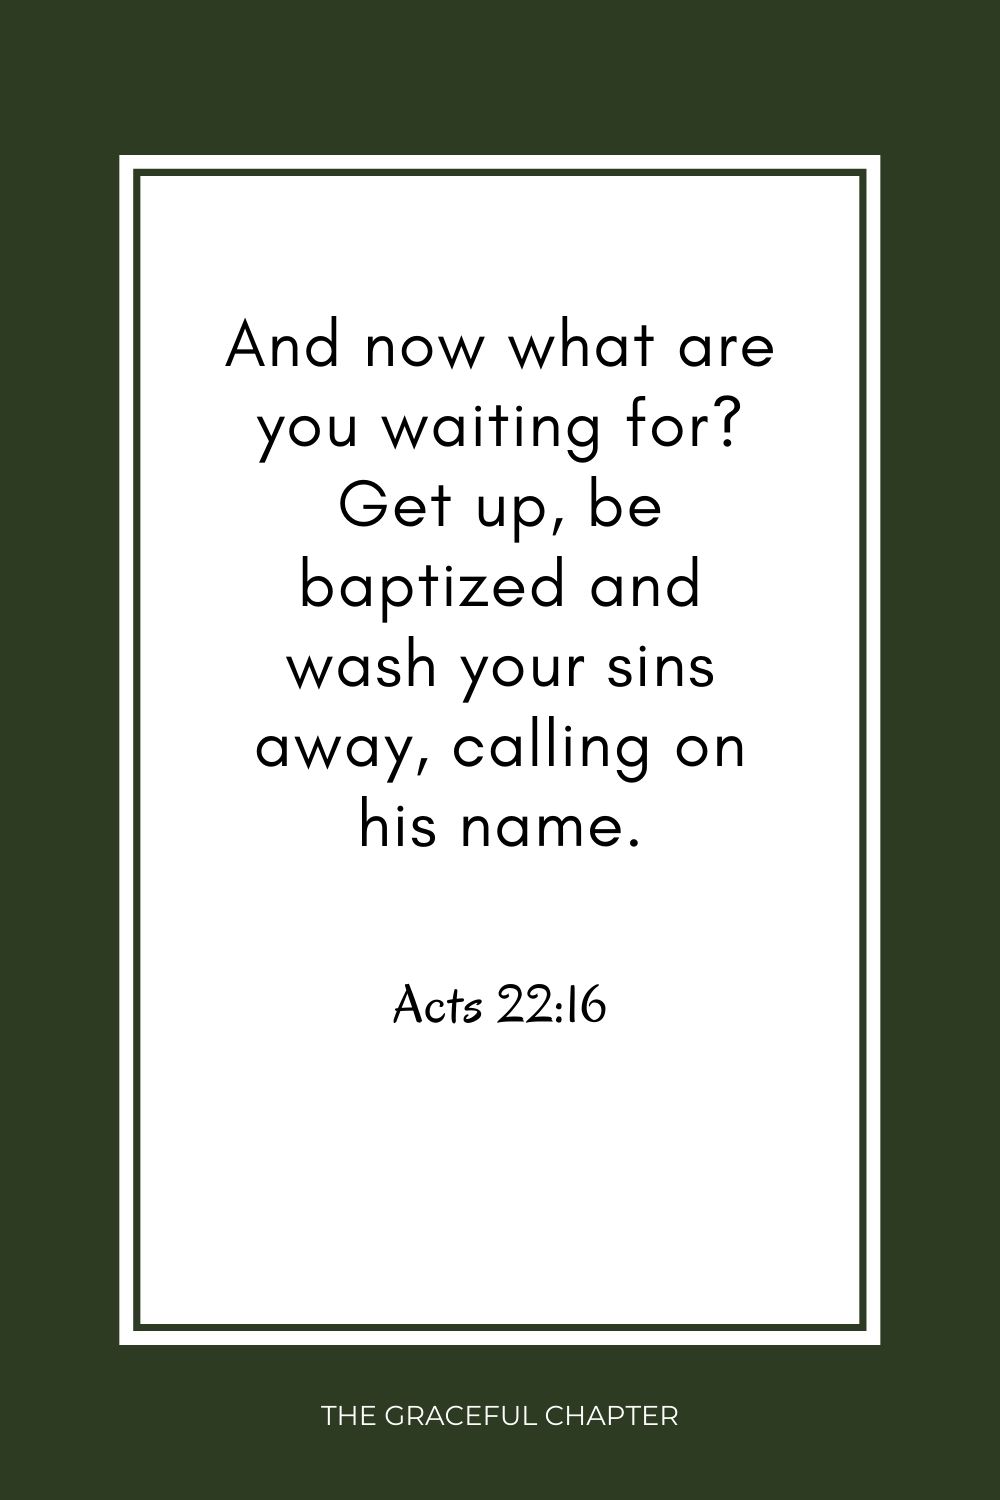 And now what are you waiting for? Get up, be baptized and wash your sins away, calling on his name. Acts 22:16